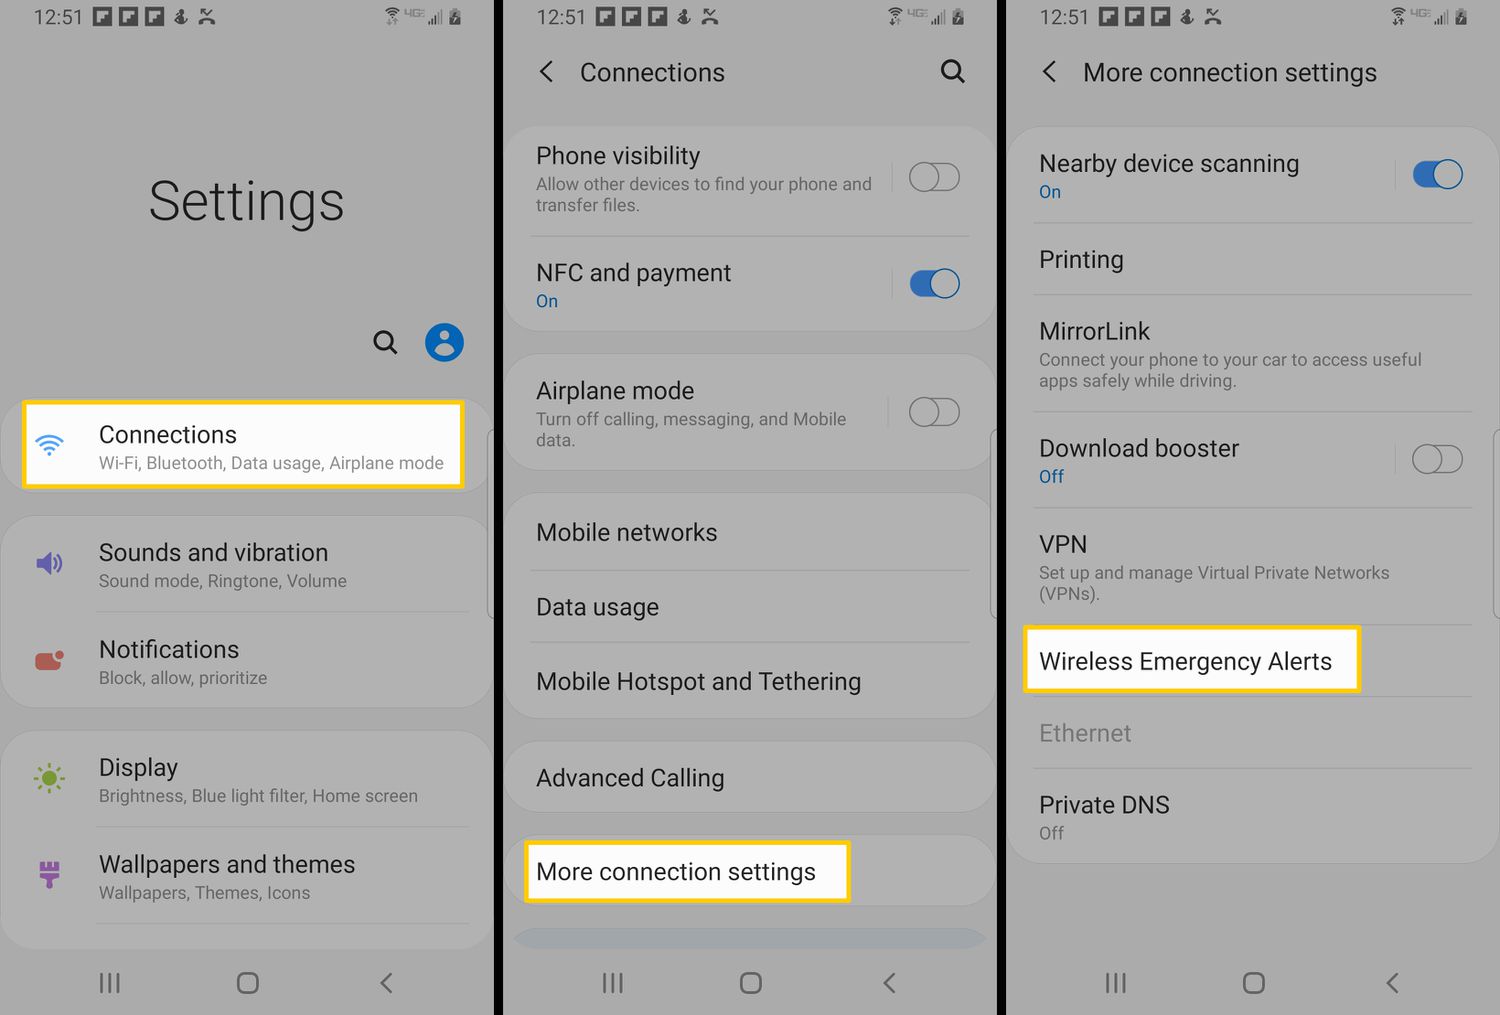 Managing Alerts: Disabling Amber Alerts On Sony Xperia